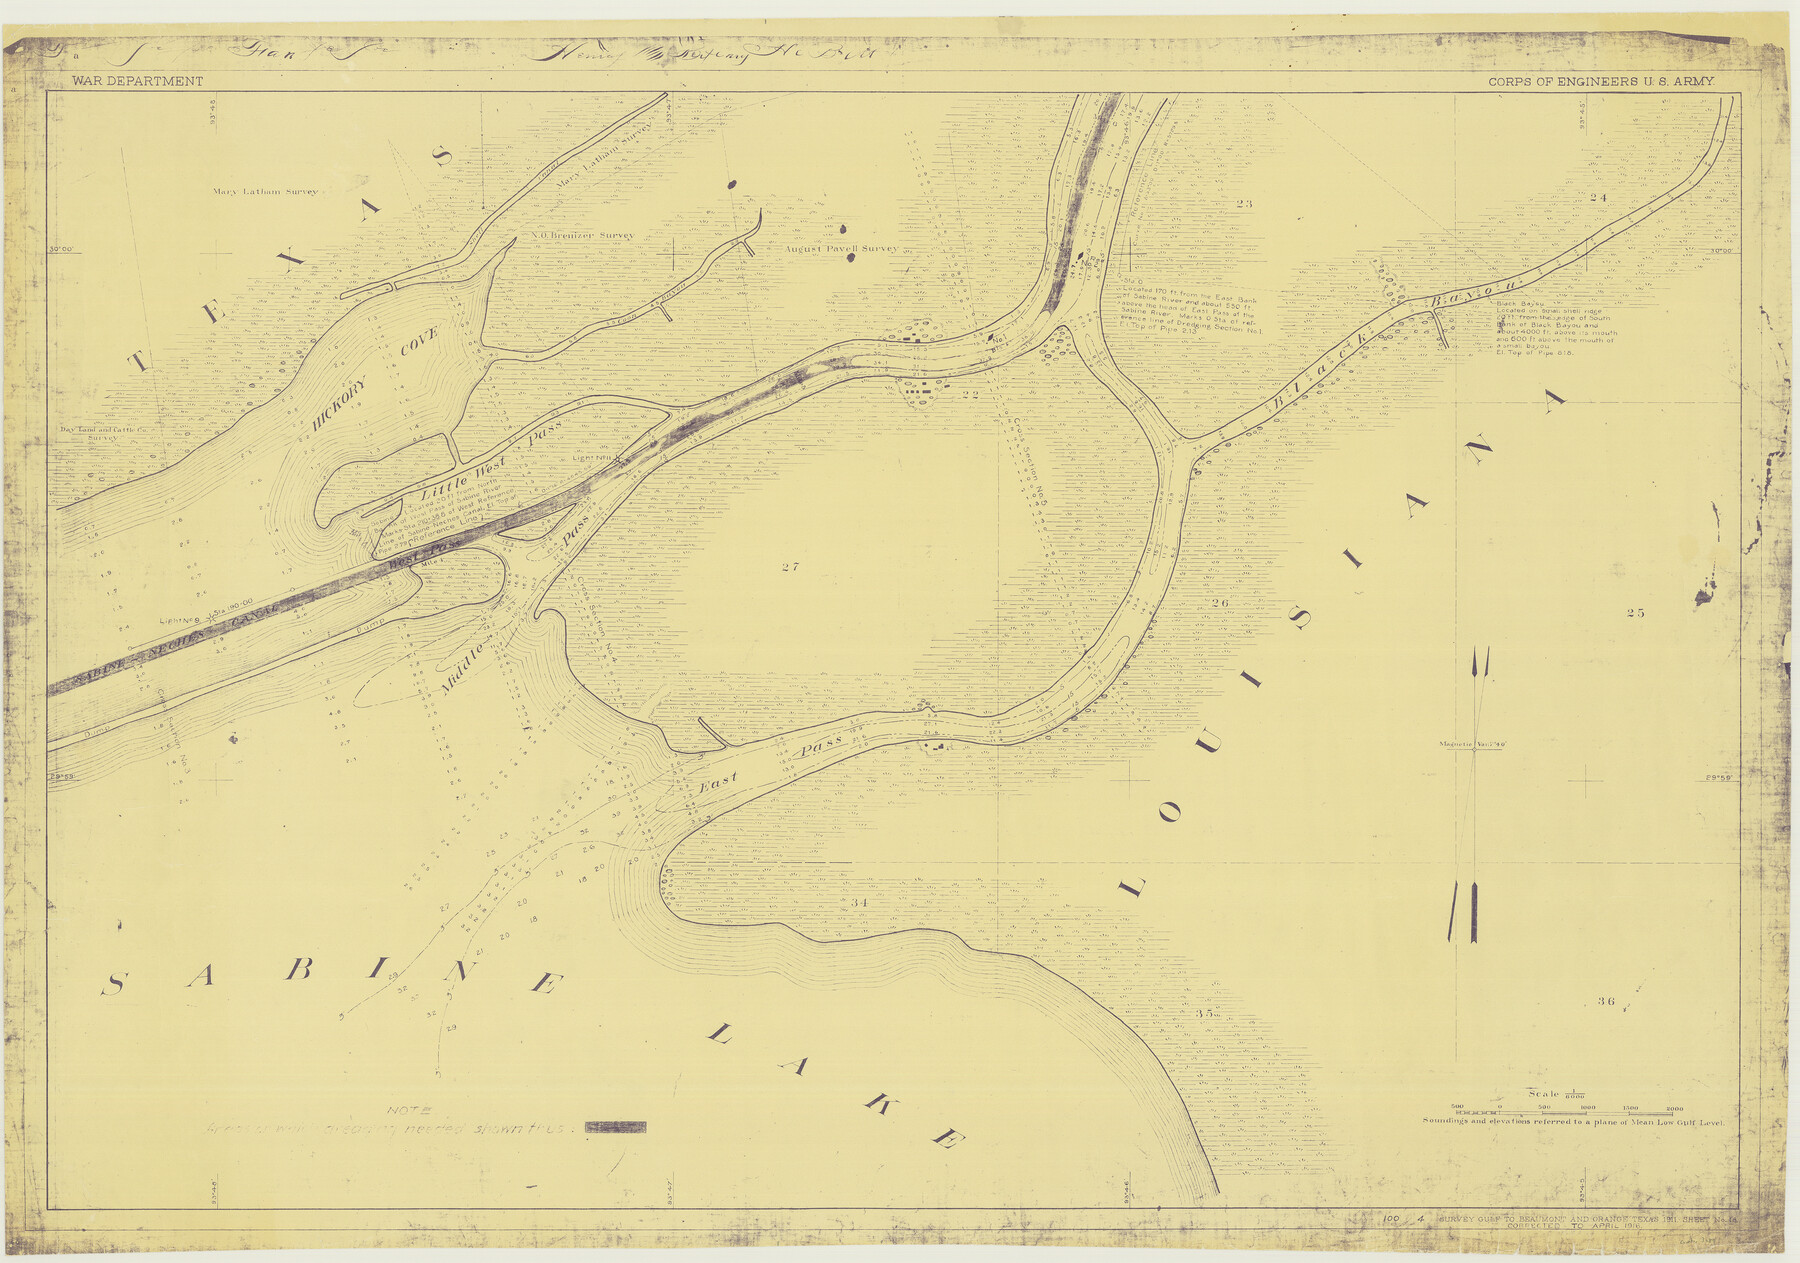 3089, Survey Gulf to Beaumont and Orange, Texas, General Map Collection